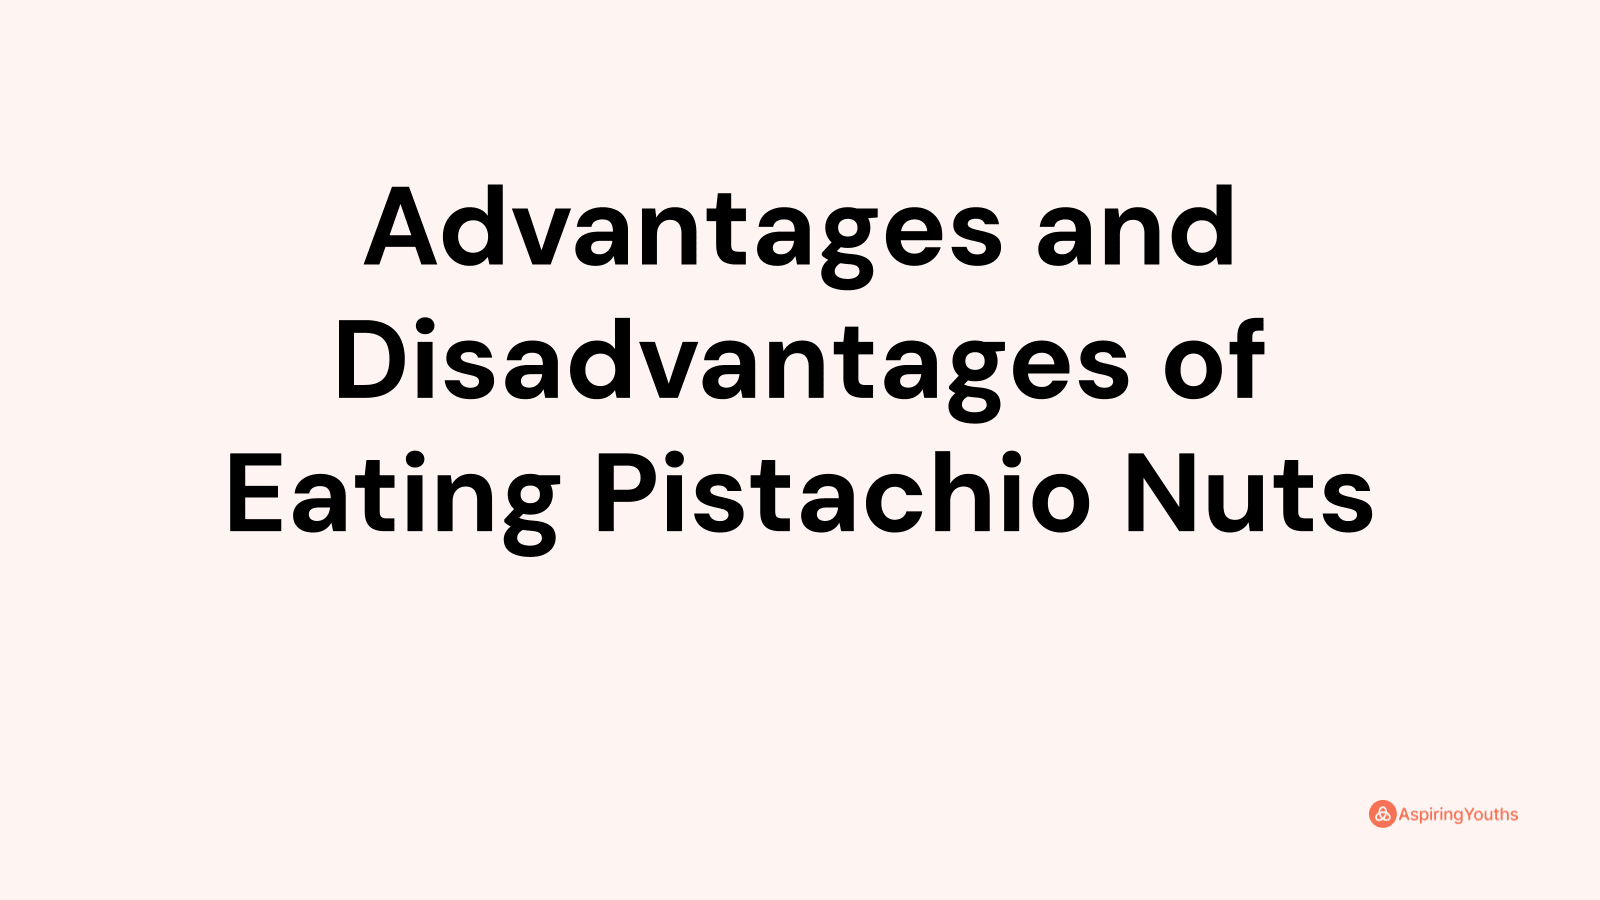 Advantages and disadvantages of Eating Pistachio Nuts